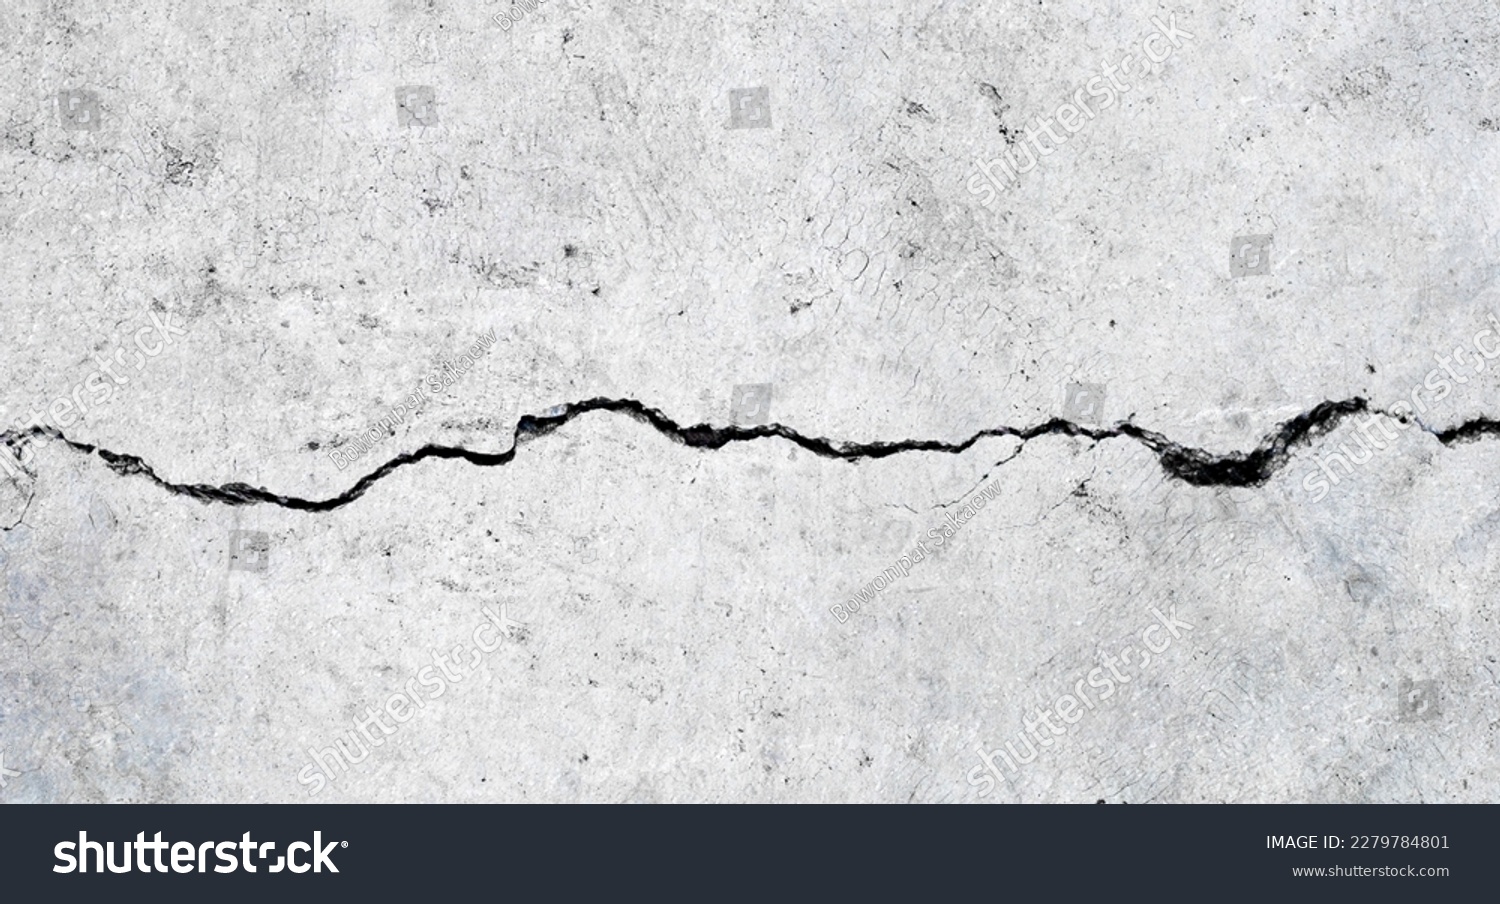 Cracked cement floor texture for background. #2279784801